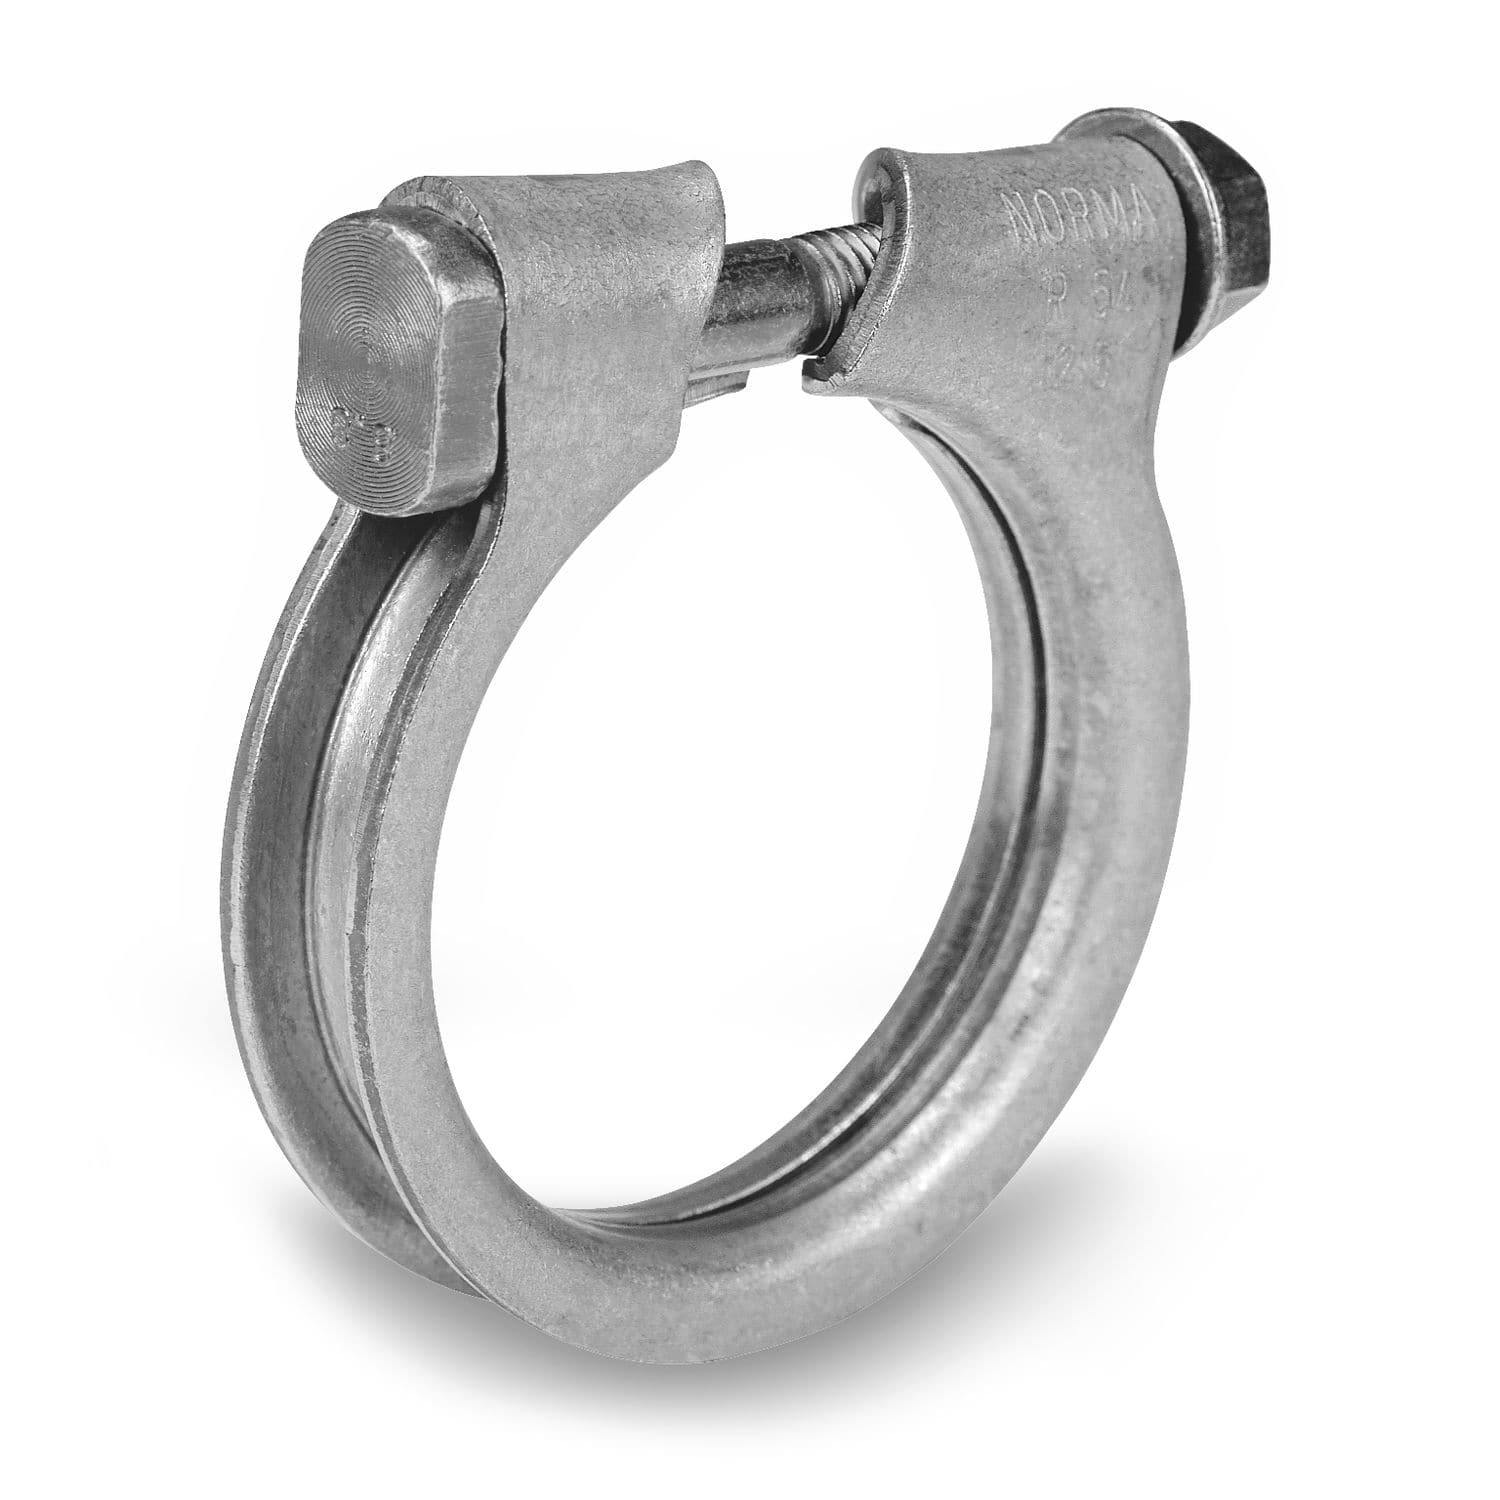 Screw pipe clamp / stainless steel / exhaust - ARS series - NORMA GROUP